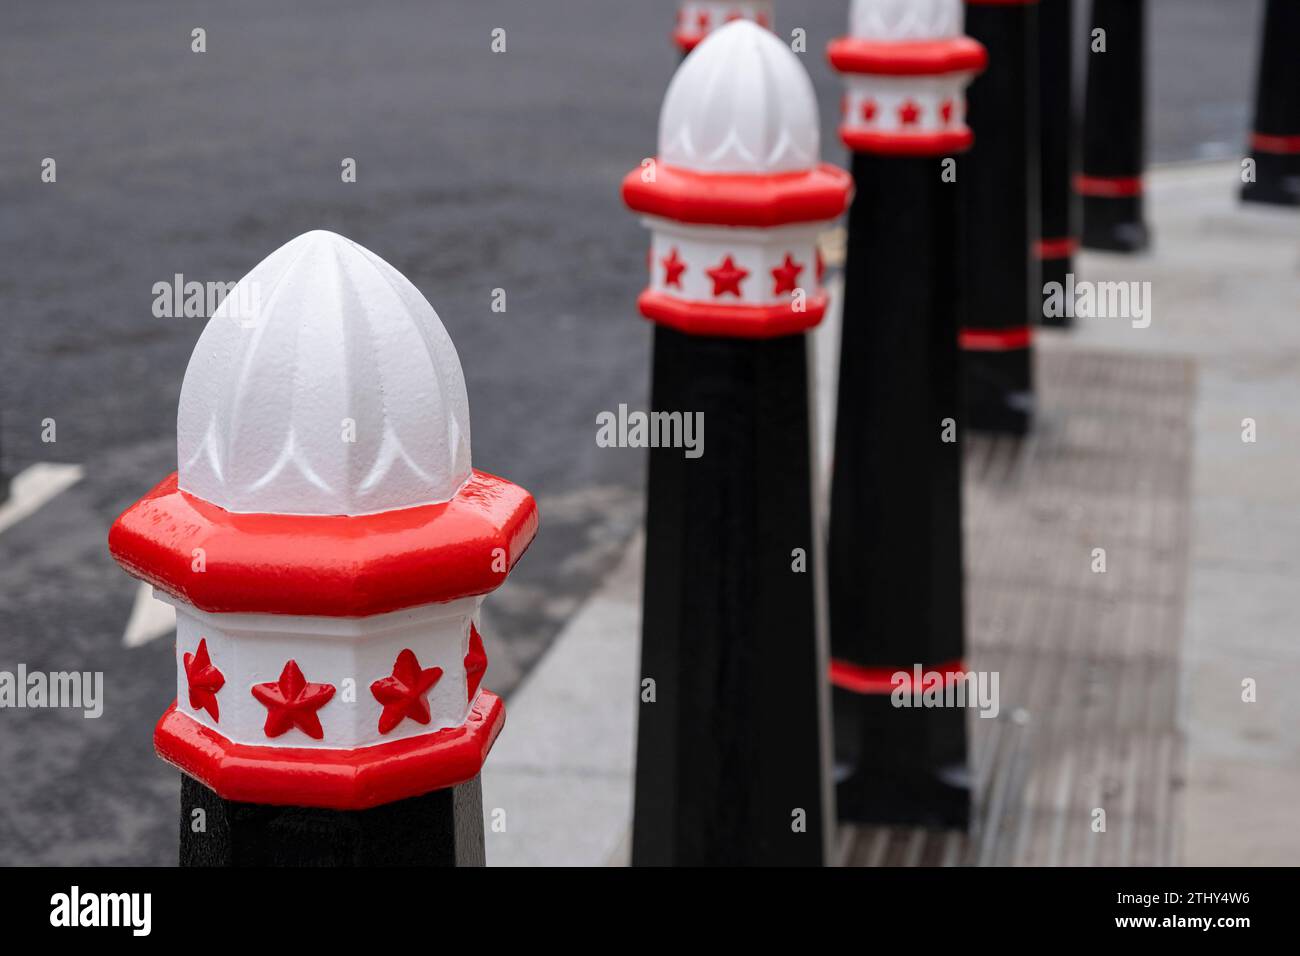 Red white and black bollards in the City of London on 7th December 2023 in London, United Kingdom. The City of London is a city, ceremonial county and local government district that contains the primary central business district CBD of London. The City of London is widely referred to simply as the City is also colloquially known as the Square Mile. Stock Photo